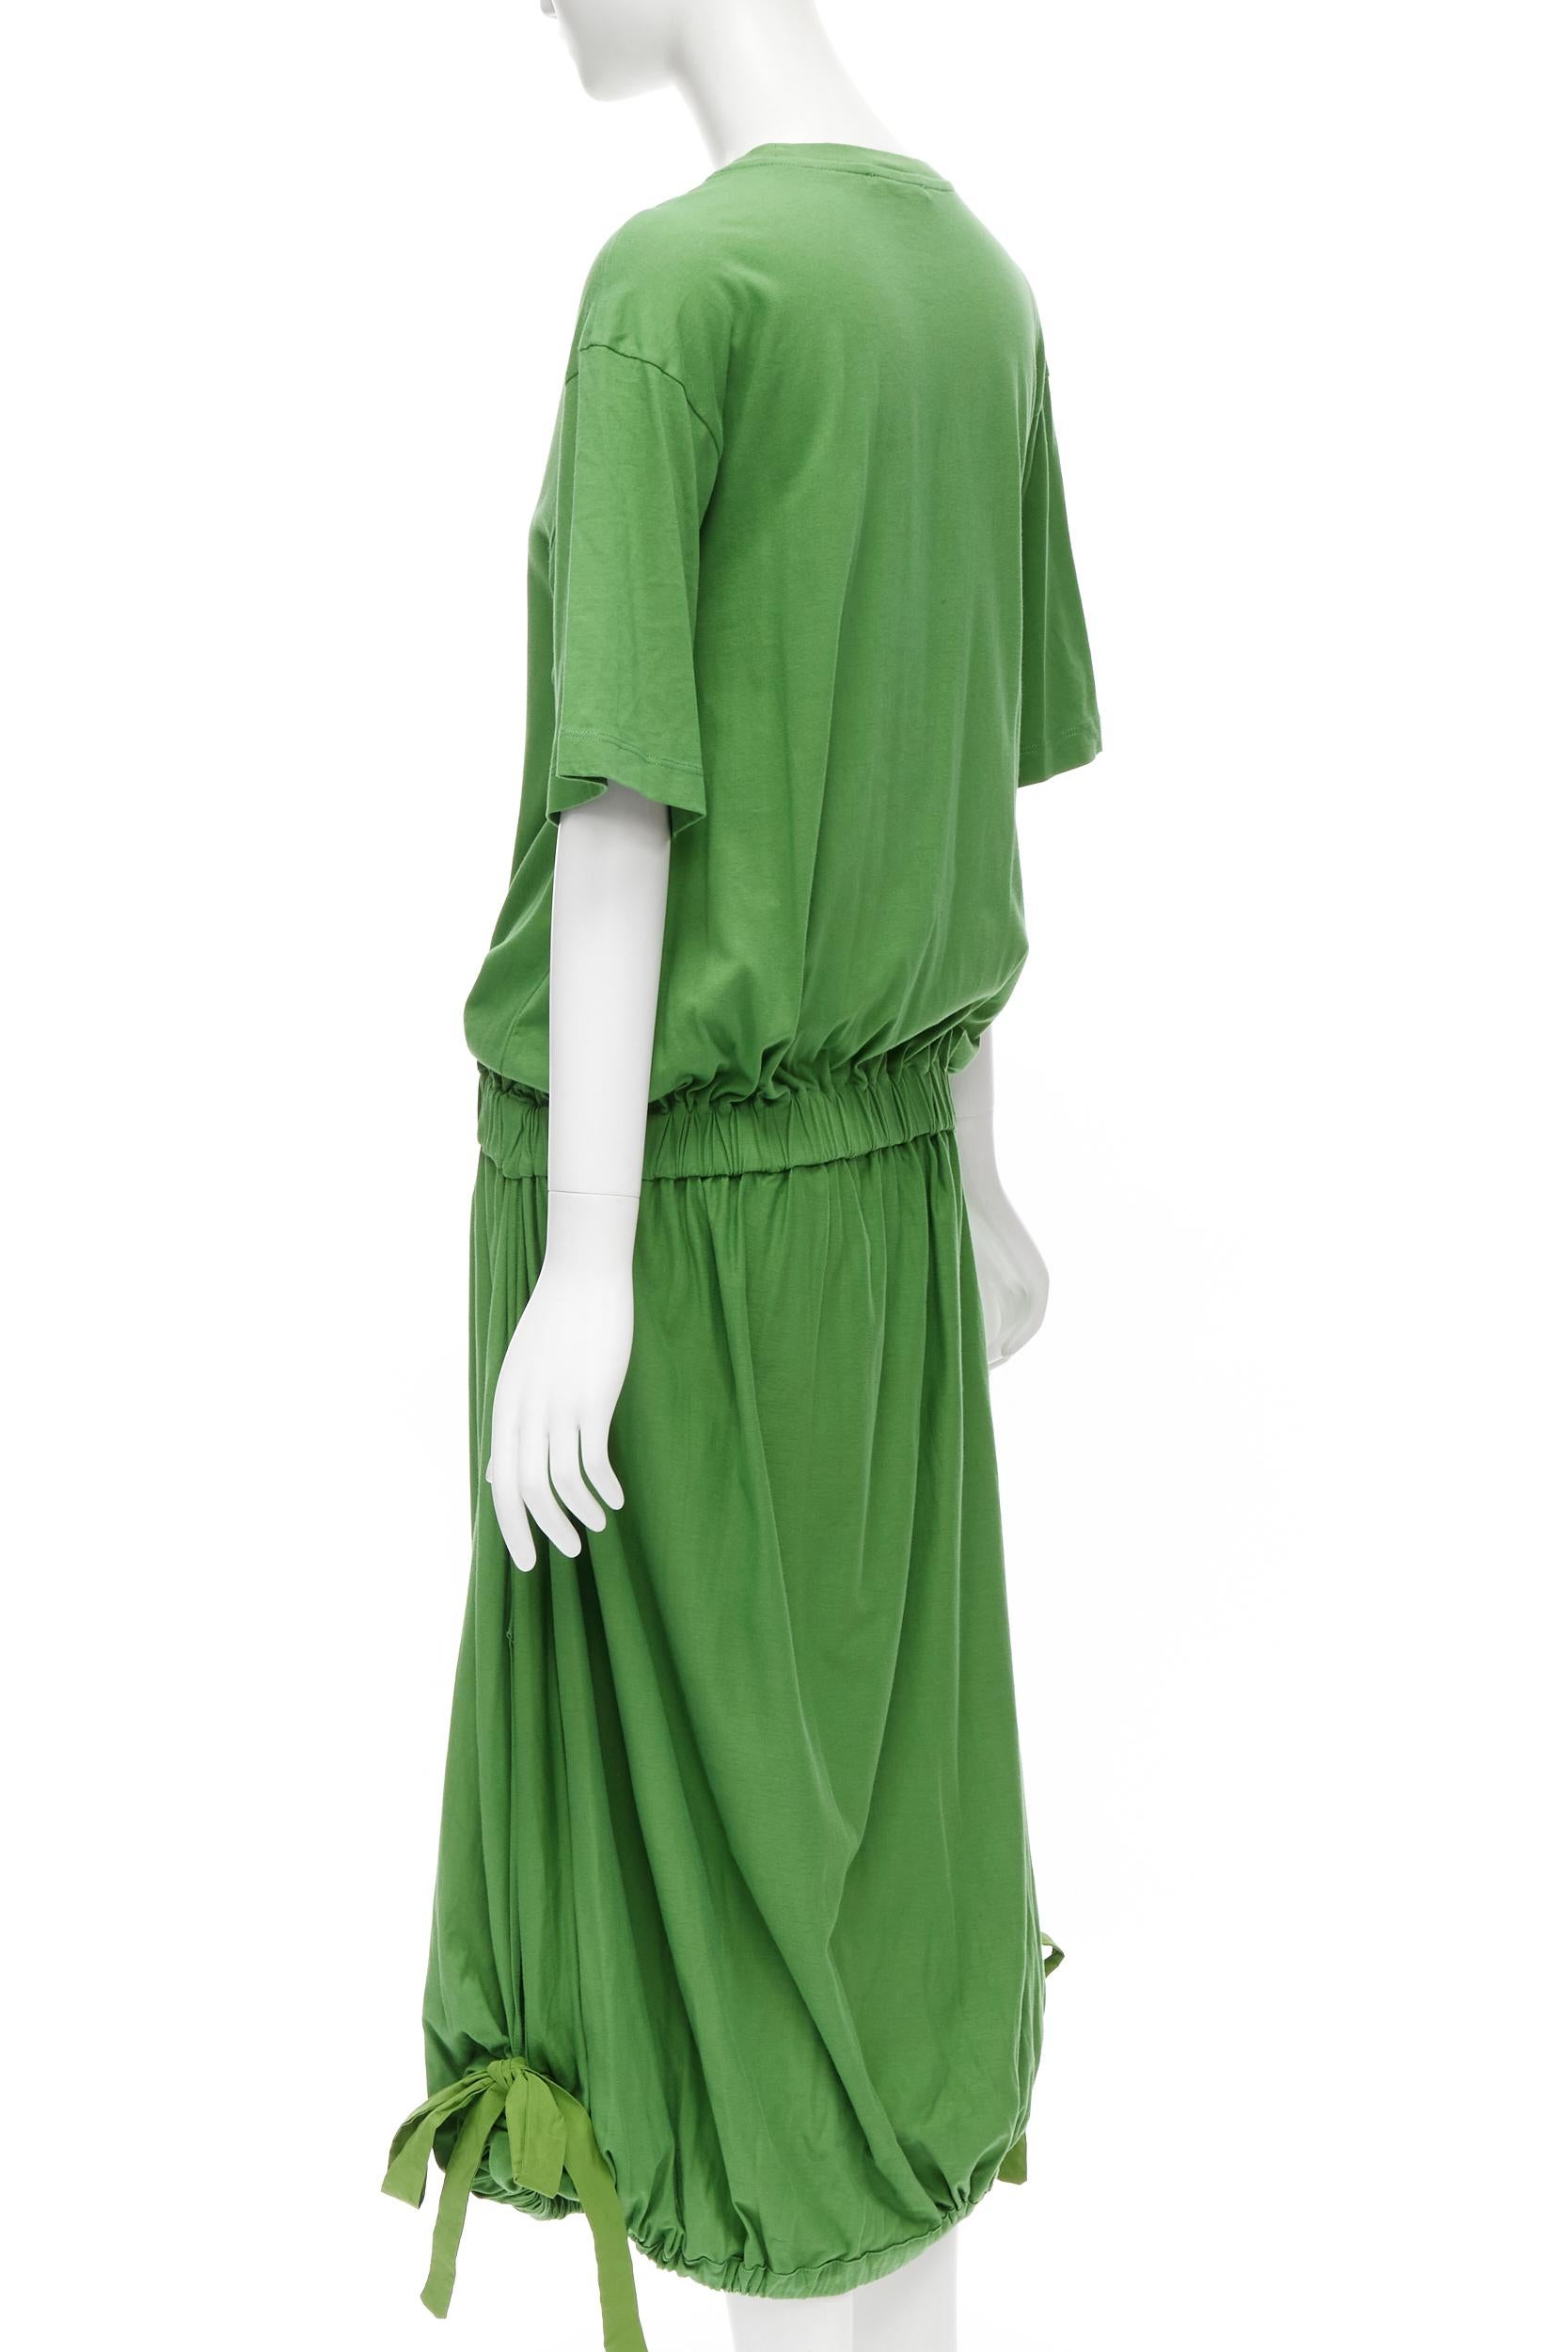 MARNI green cotton waist grosgrain bow drawstring hem t-shirt dress IT38 XS In Excellent Condition For Sale In Hong Kong, NT